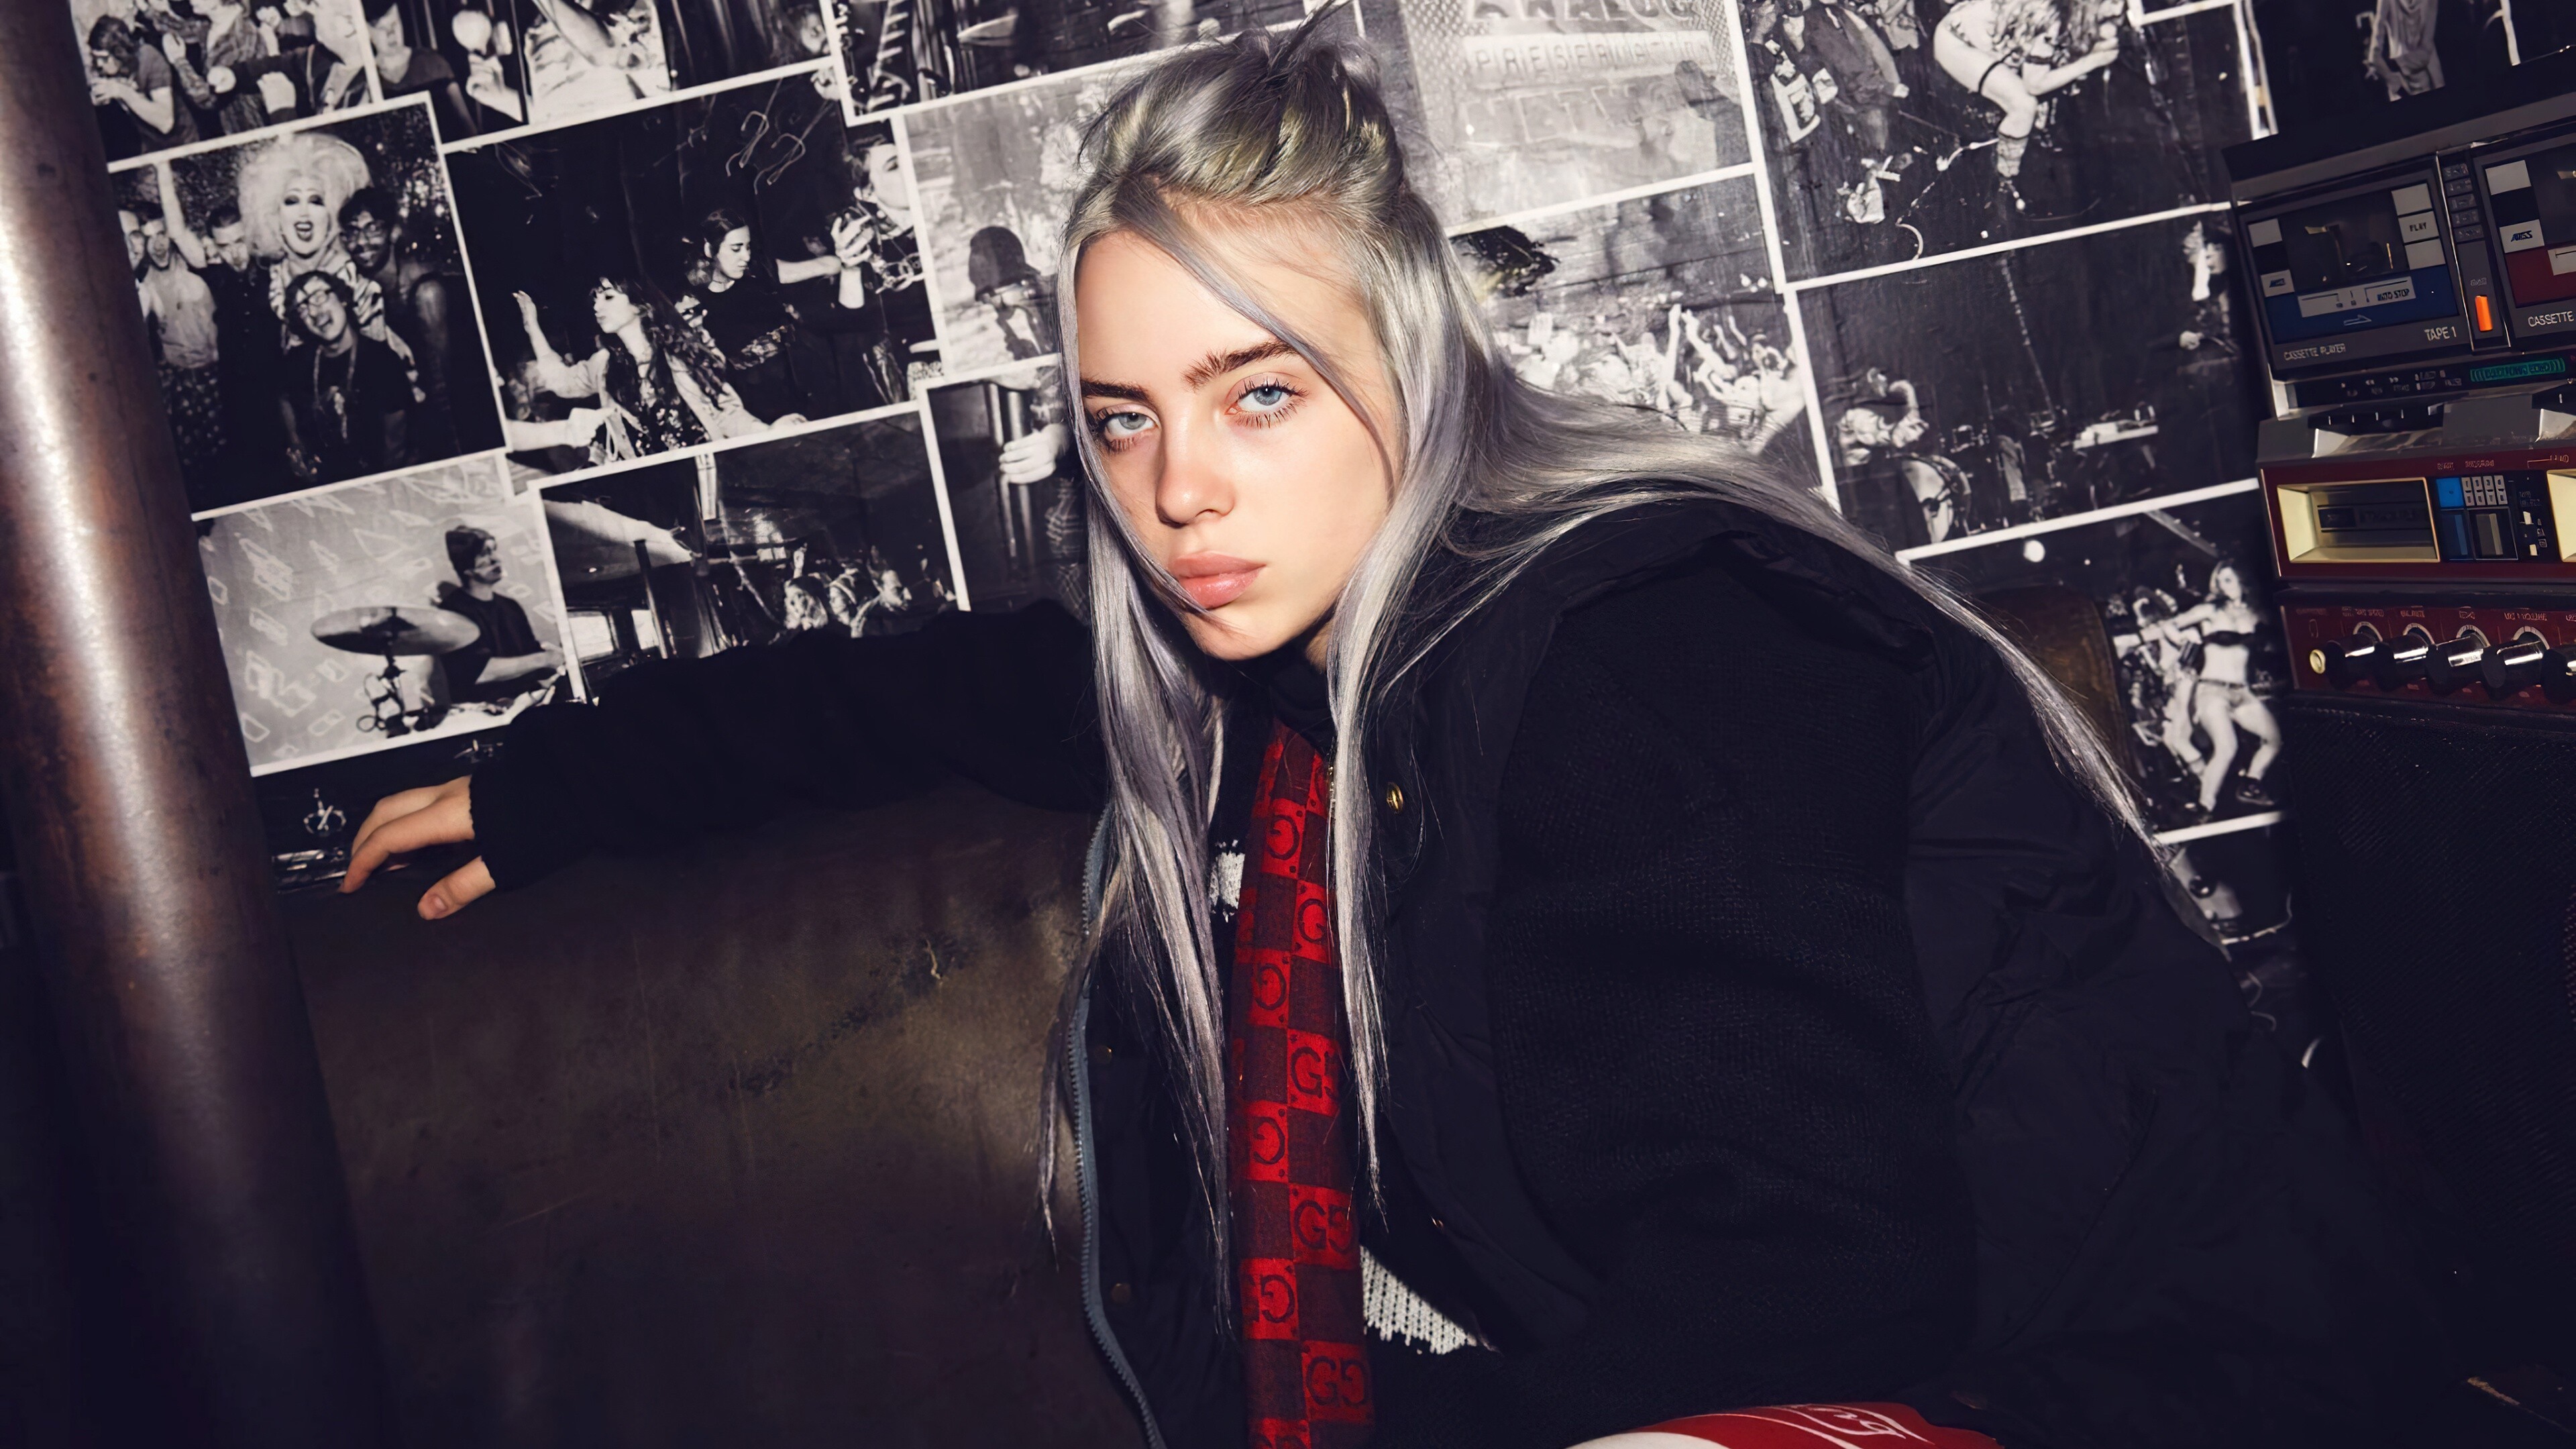 Billie Eilish: Don't Smile at Me, Reached the top 15 of record charts in numerous countries. 3840x2160 4K Background.